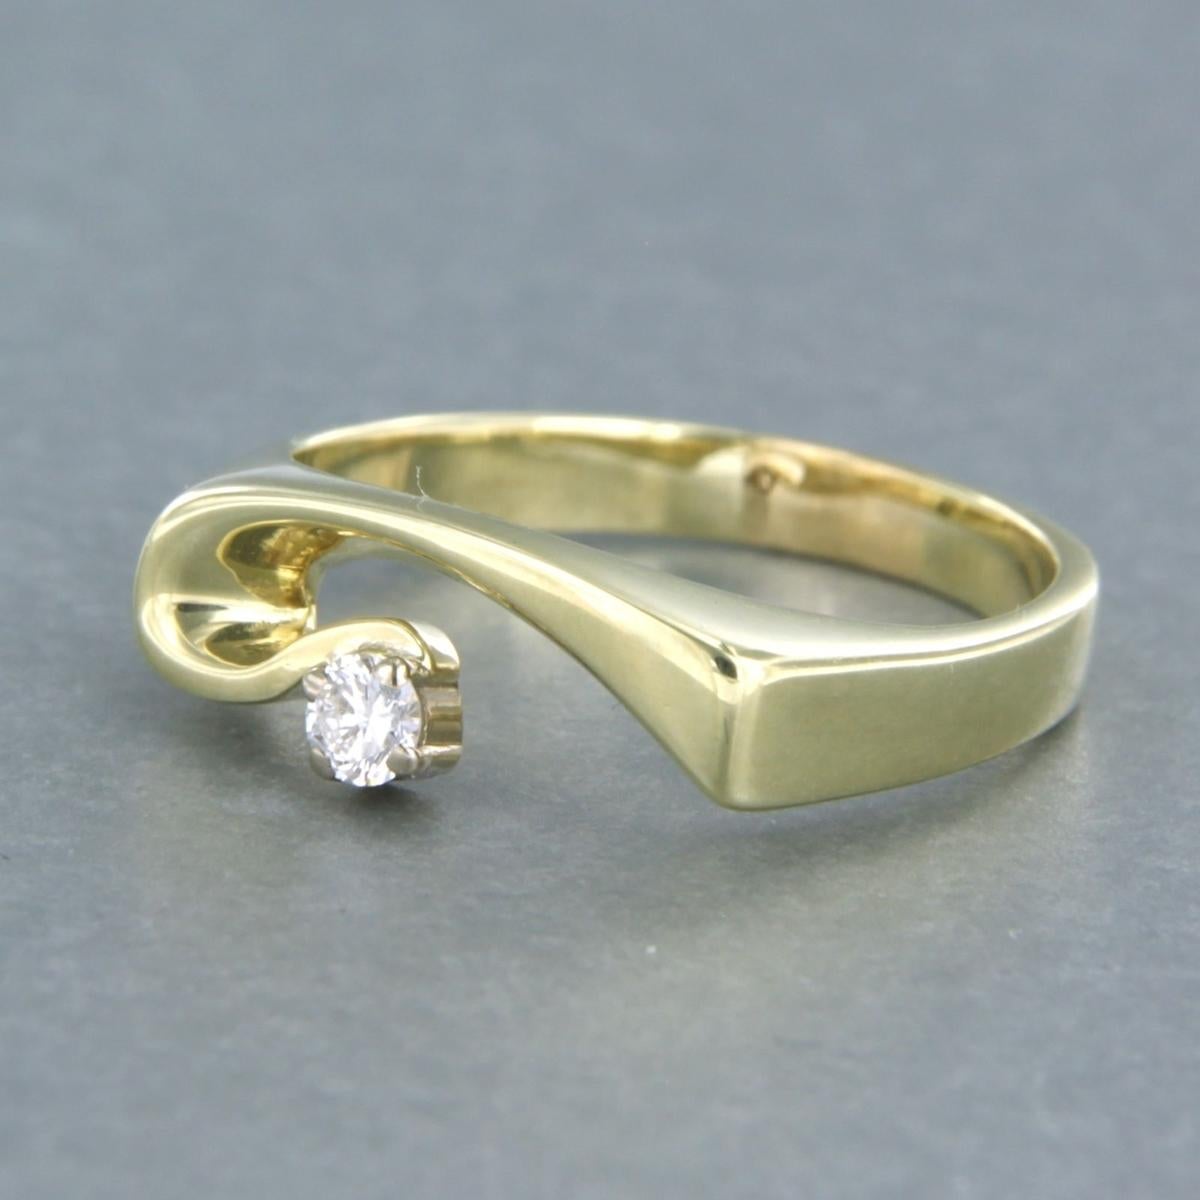 14k Yellow Gold Ring Set with One Brilliant Cut Diamond 0.12 Carat For Sale 2